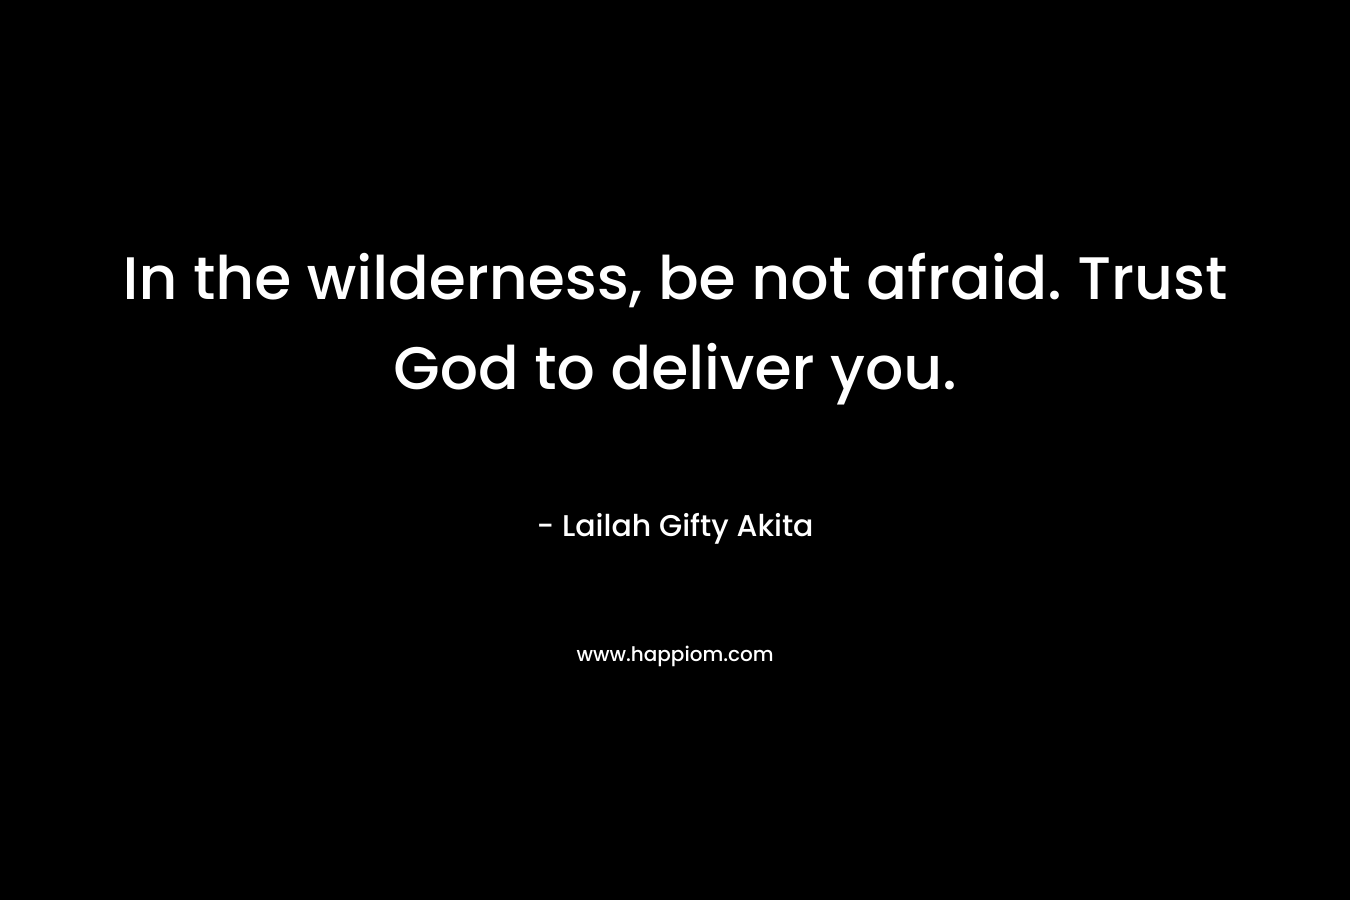 In the wilderness, be not afraid. Trust God to deliver you.